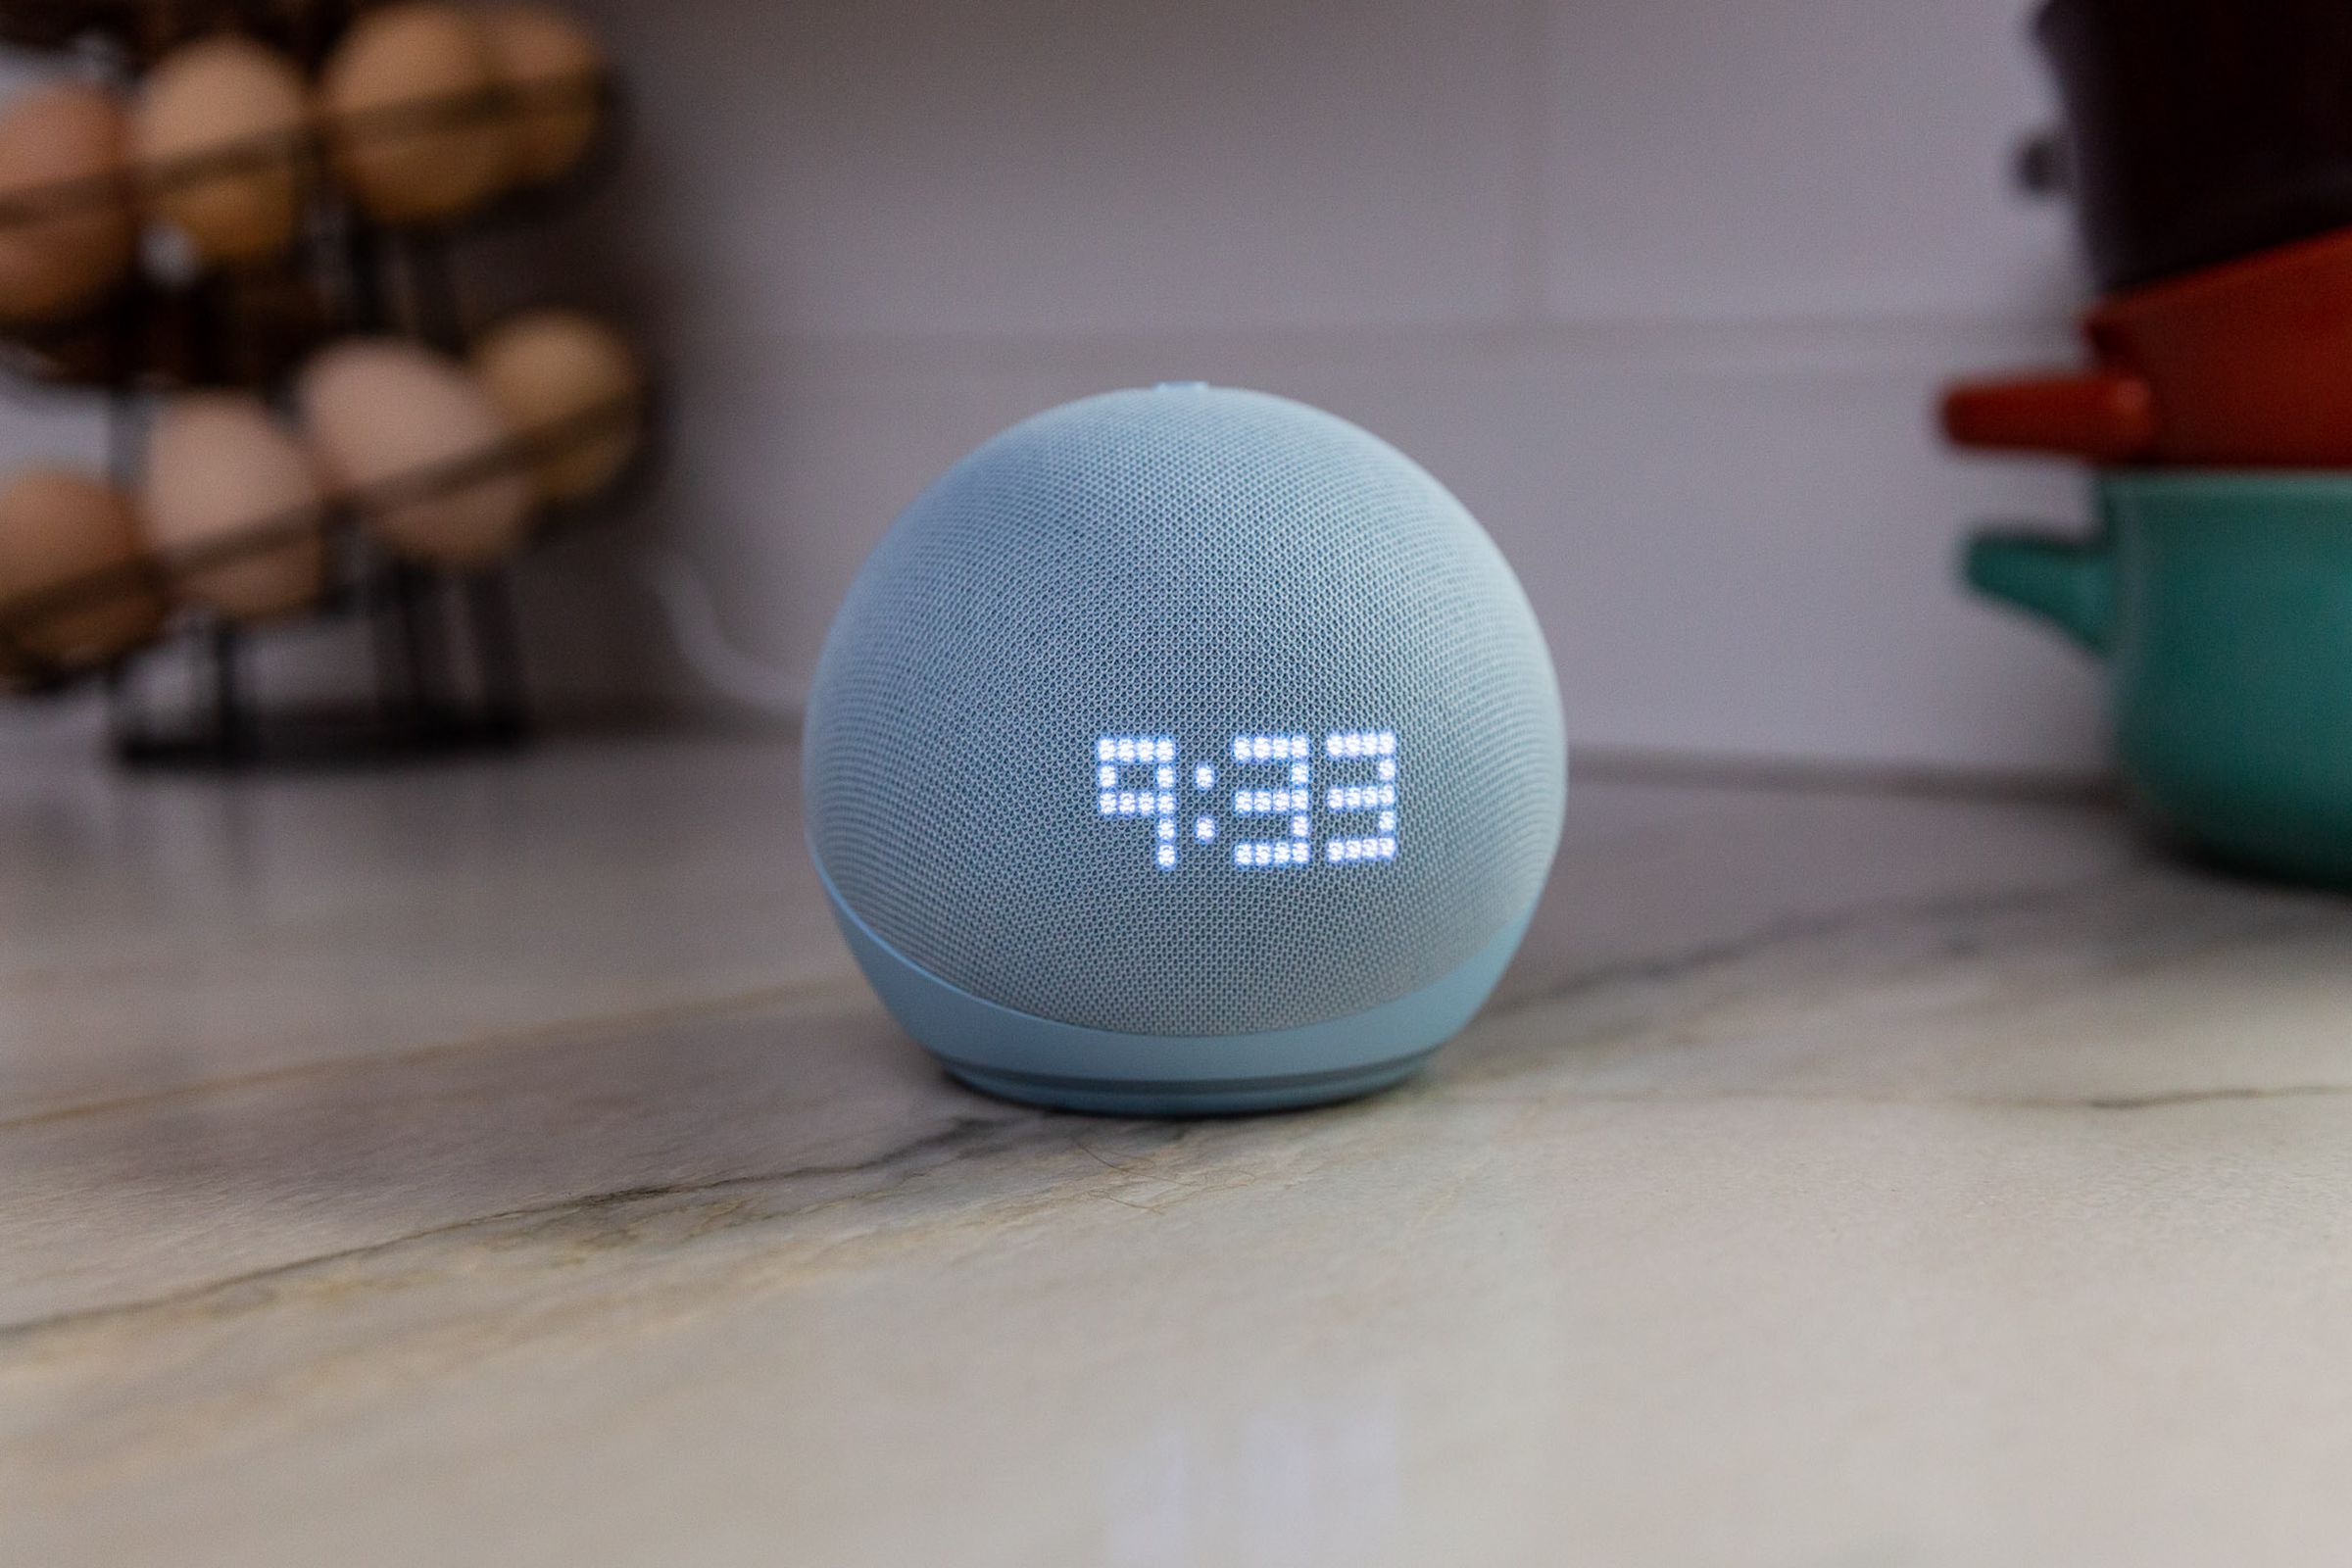 Amazon’s latest smart speaker, the fifth-gen Echo Dot with Clock, will be a Matter controller next month.